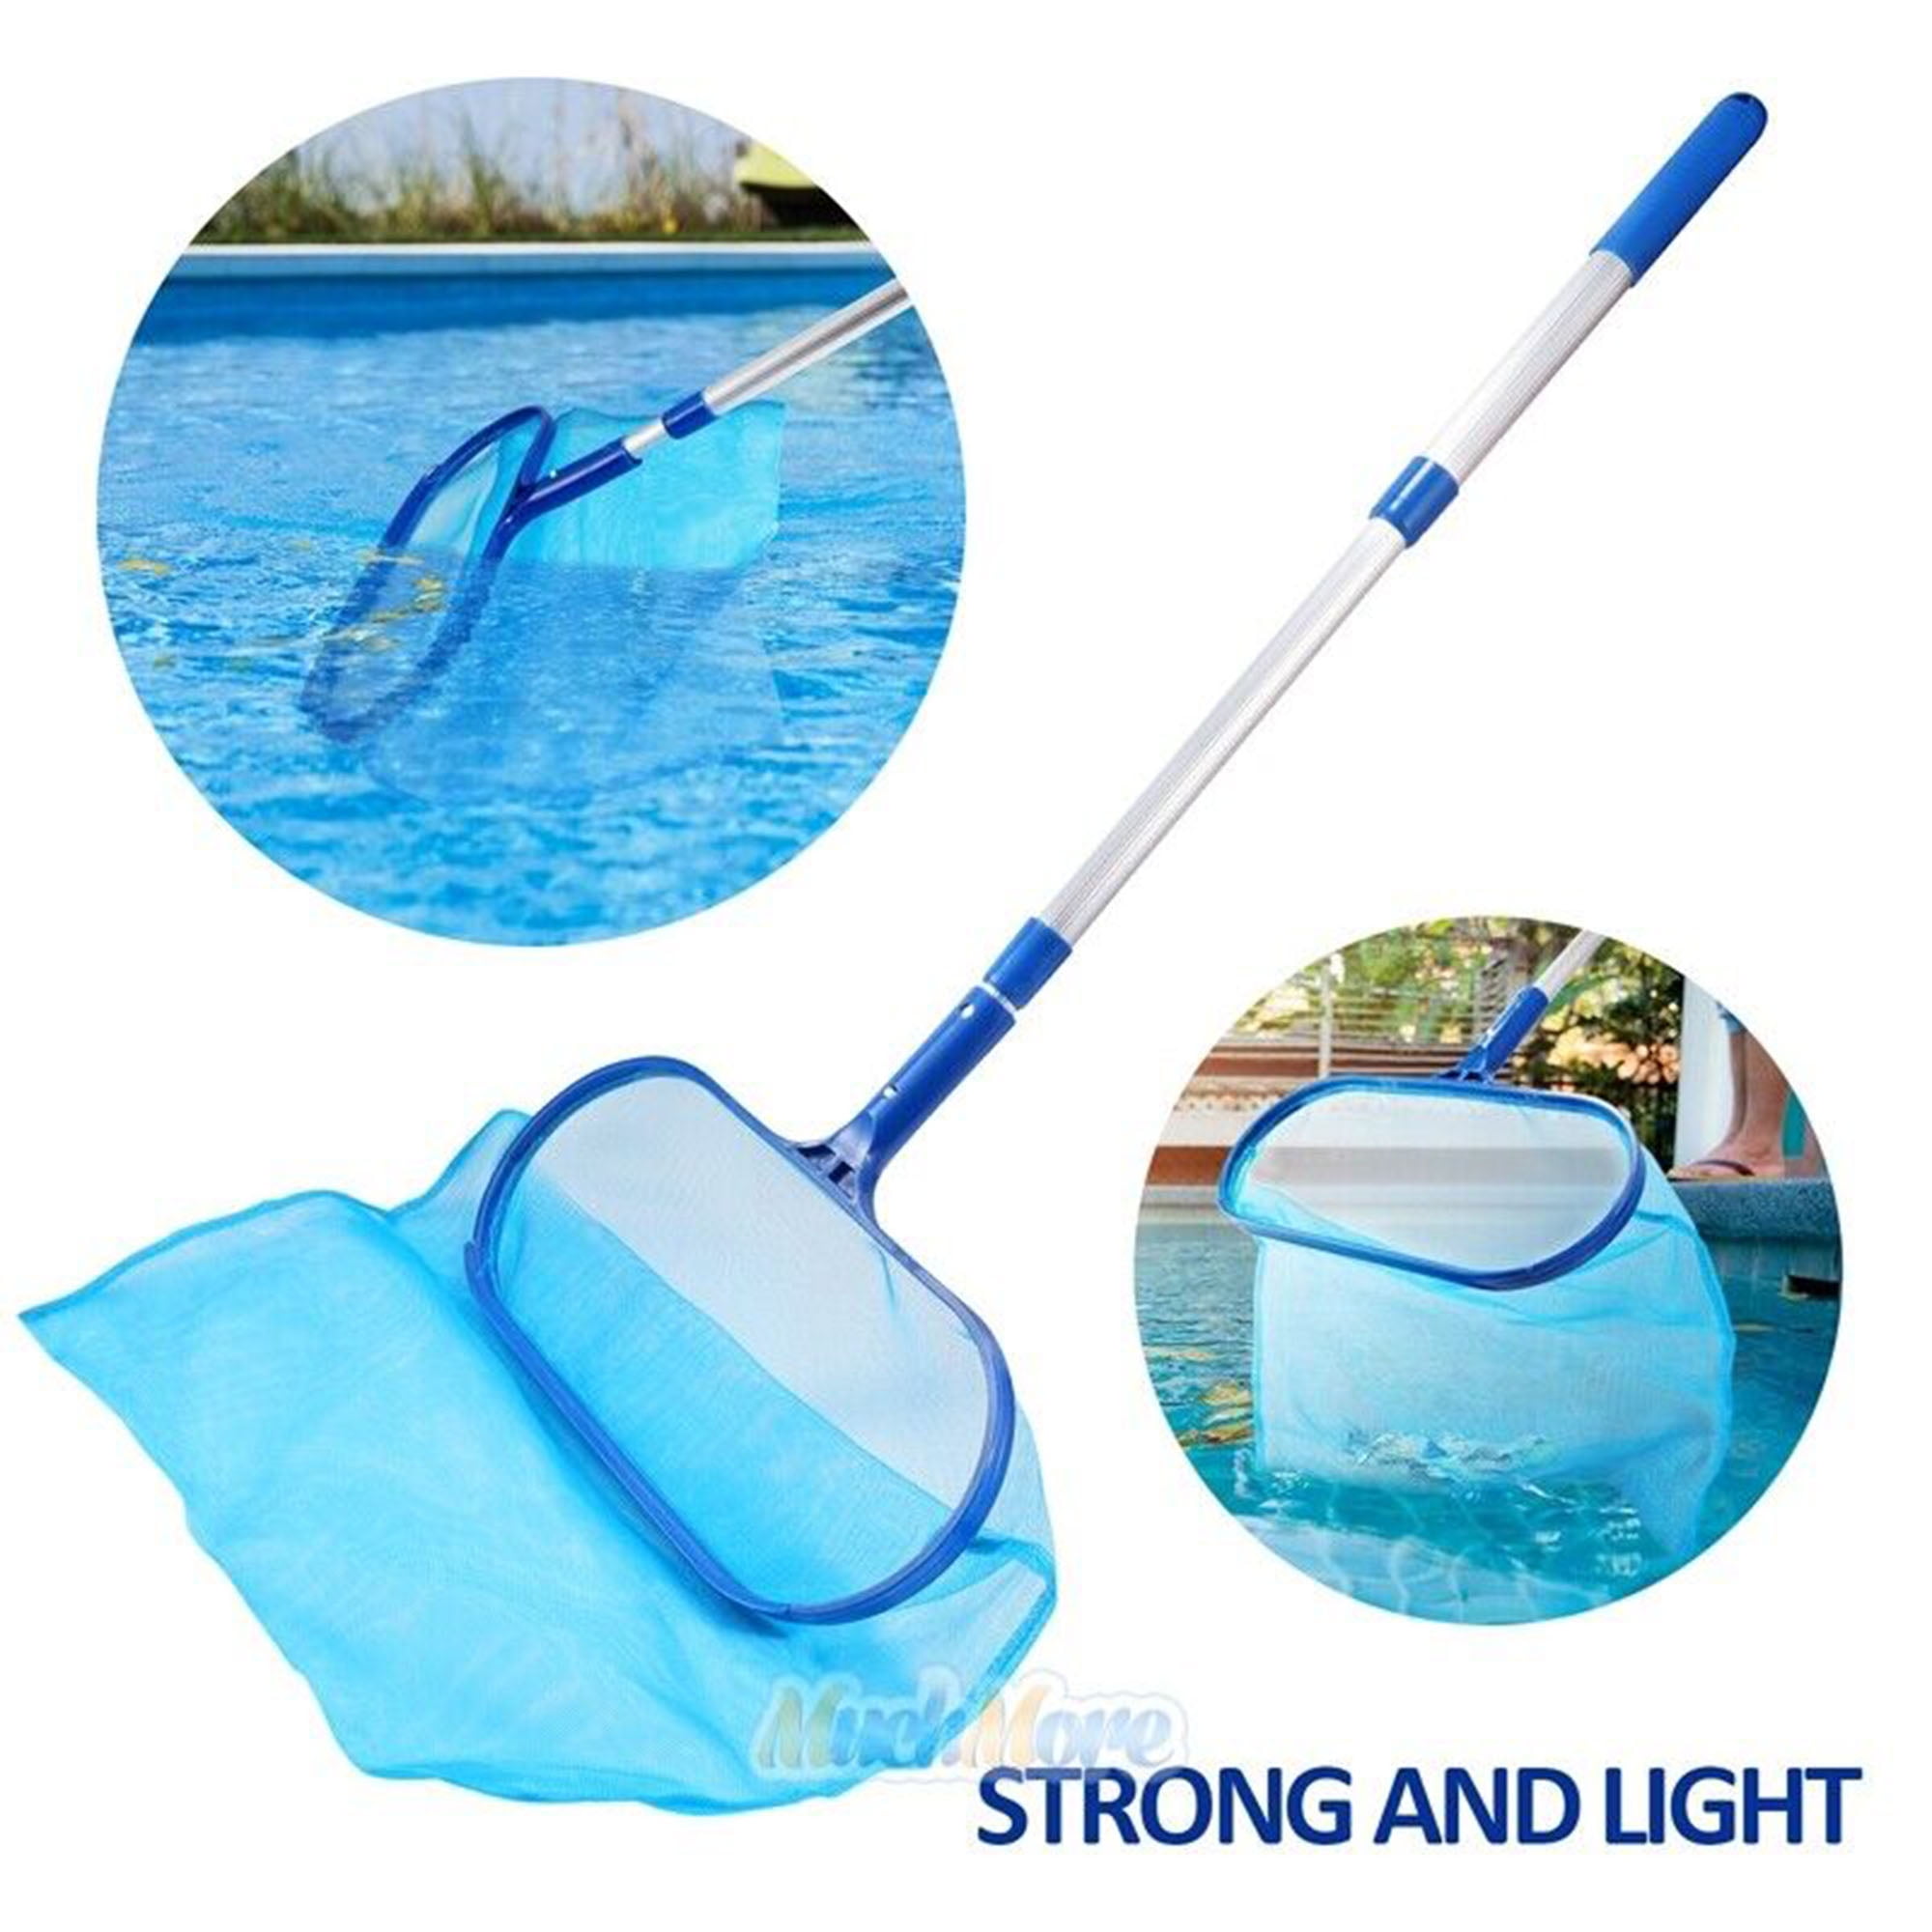 Premium Extra Strong Leaf Skimmer Net Head Cleaner for Swimming Pool Spa Fountain Pond Hot Tub Leaves Bugs Debris Fine Cleaning Maintenance, Blue